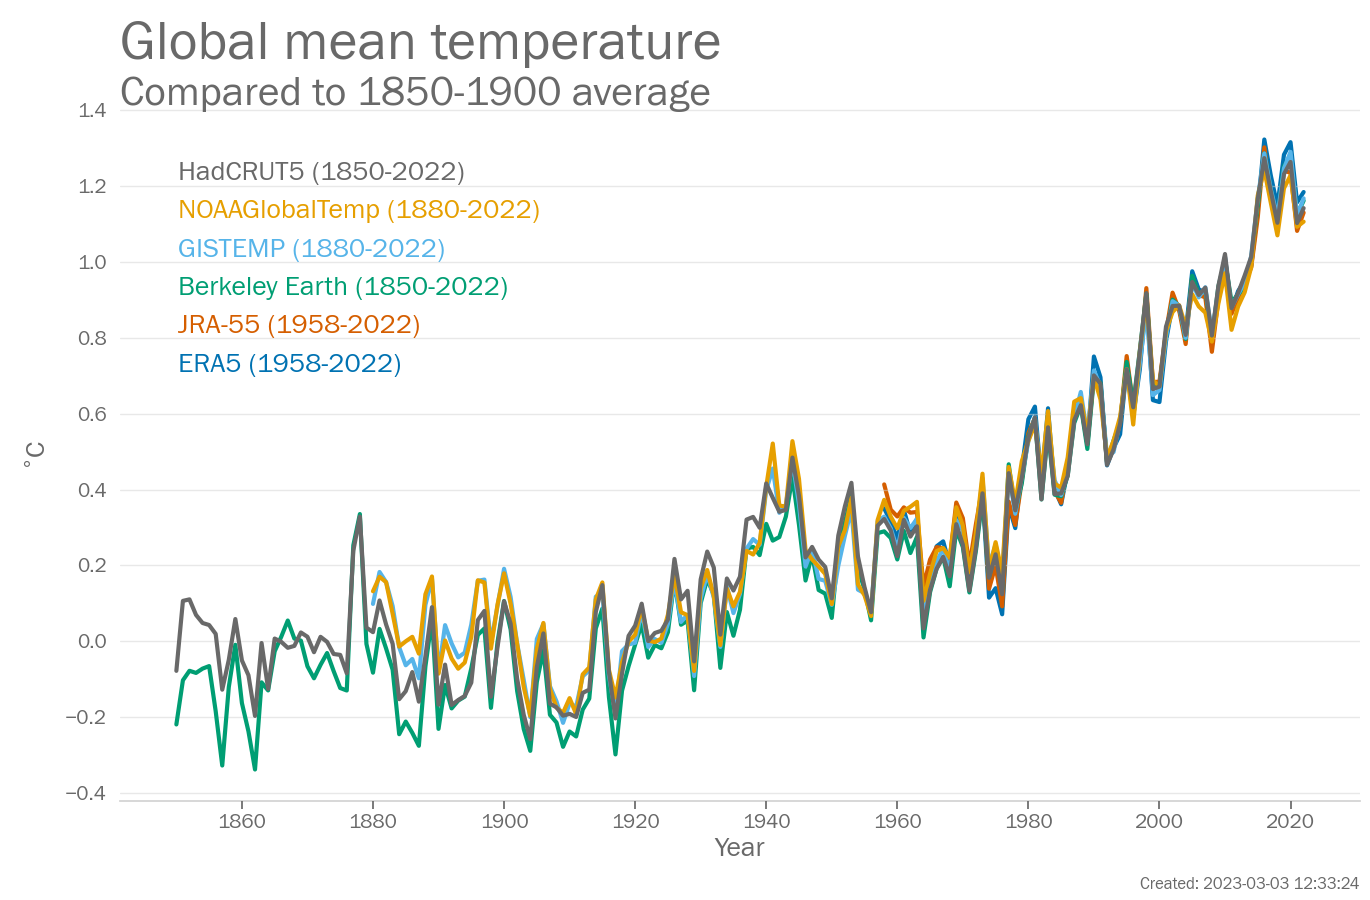 Annual Global mean temperature (°C, difference from the 1850-1900 average)  from 1850-2022. Data are from the following six data sets: Berkeley Earth, ERA5, GISTEMP, HadCRUT5, JRA-55, NOAAGlobalTemp.